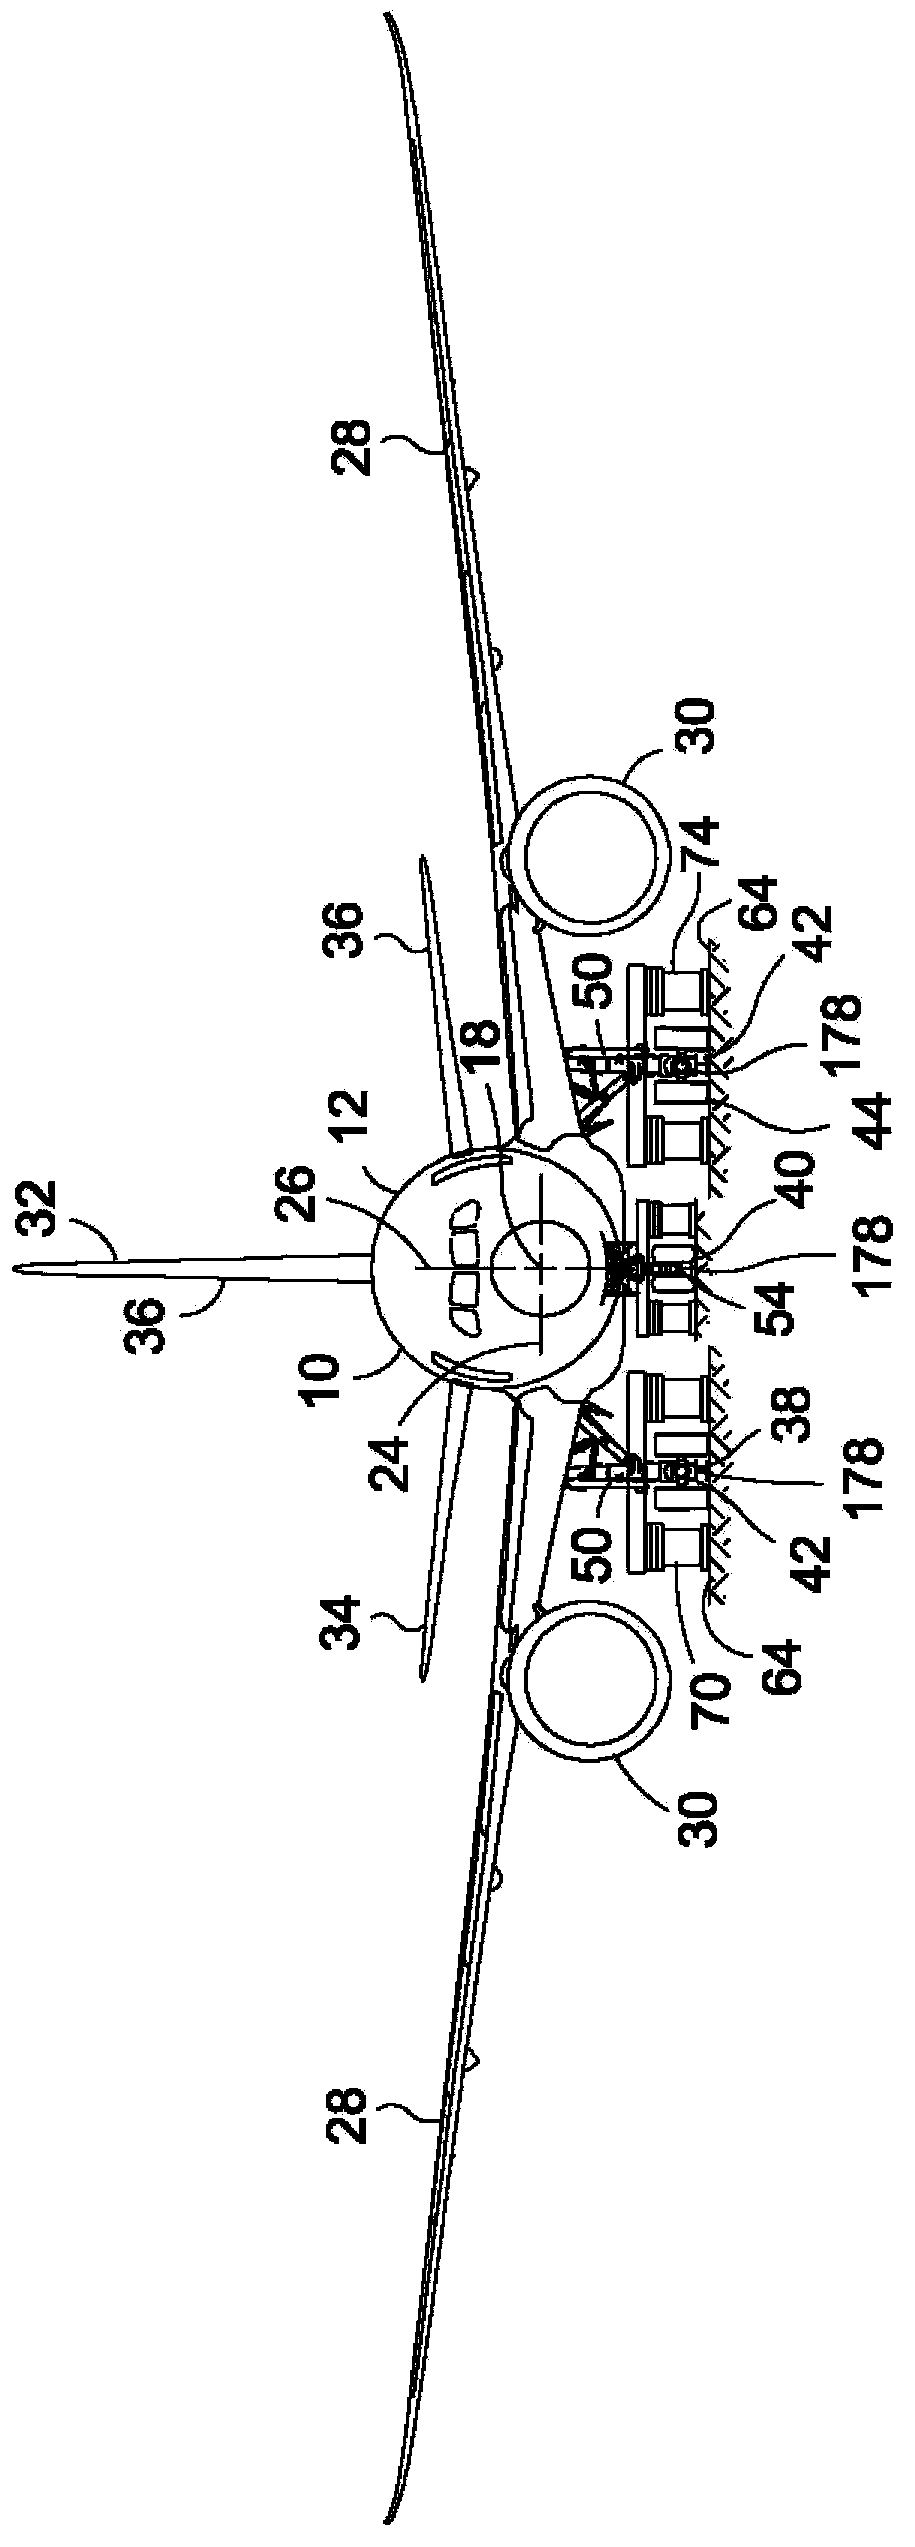 System and method for ground vibration testing and weight and balance measurement